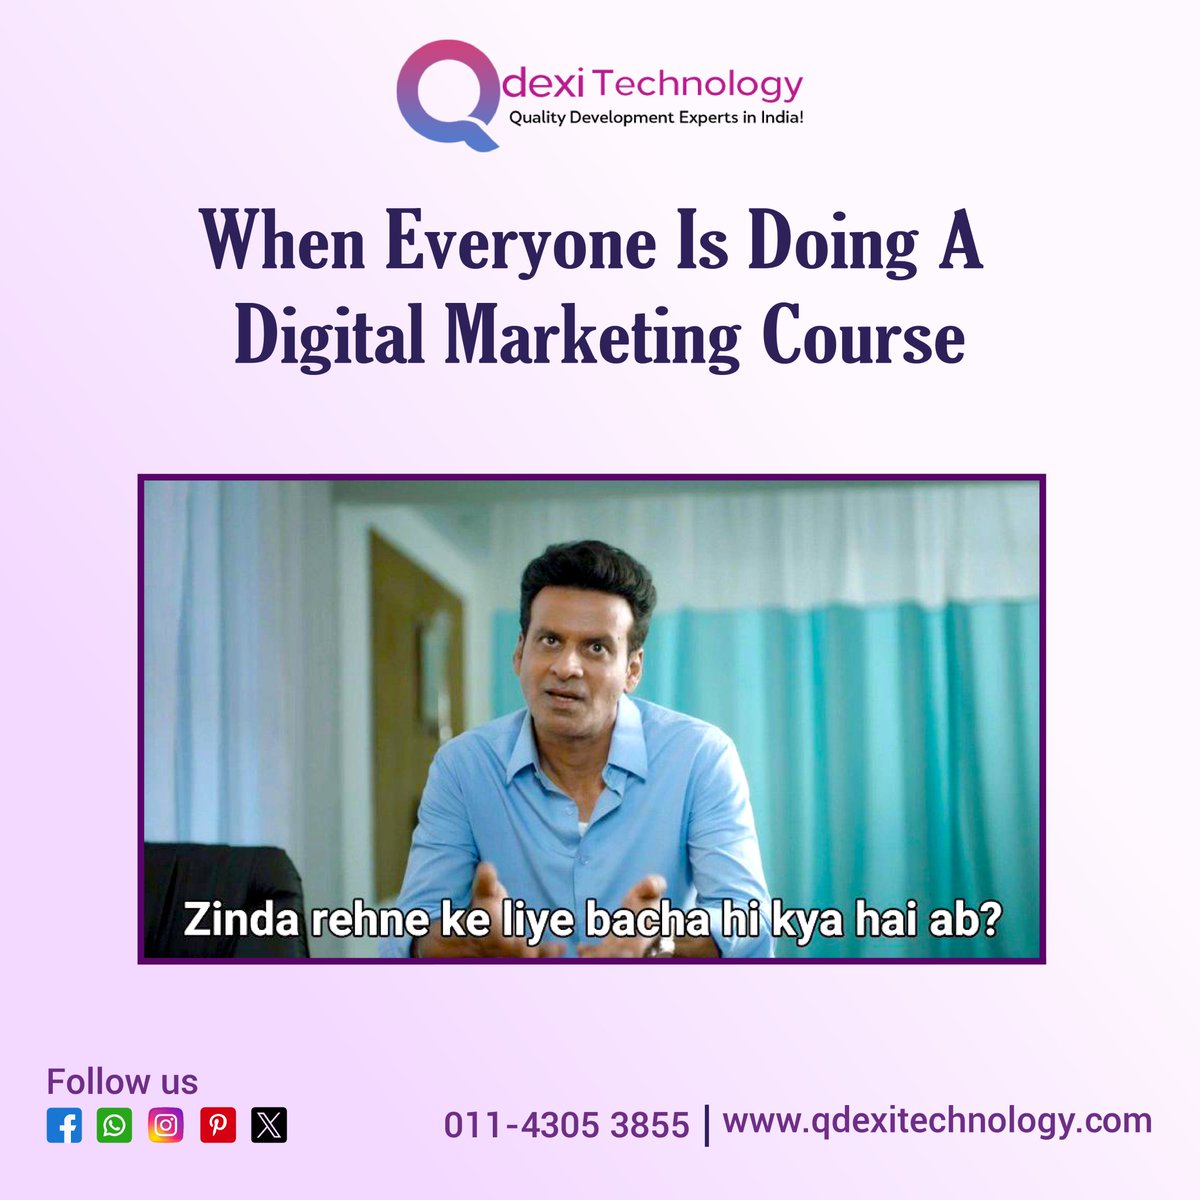 Quality Development Experts in India excel among the digital marketing course craze, ensuring industry relevance.Qdexi Technology: Quality Solutions, Innovative Approach.

#QualityDevelopment #ExpertsInIndia #IndustryRelevance #SurvivalSkills